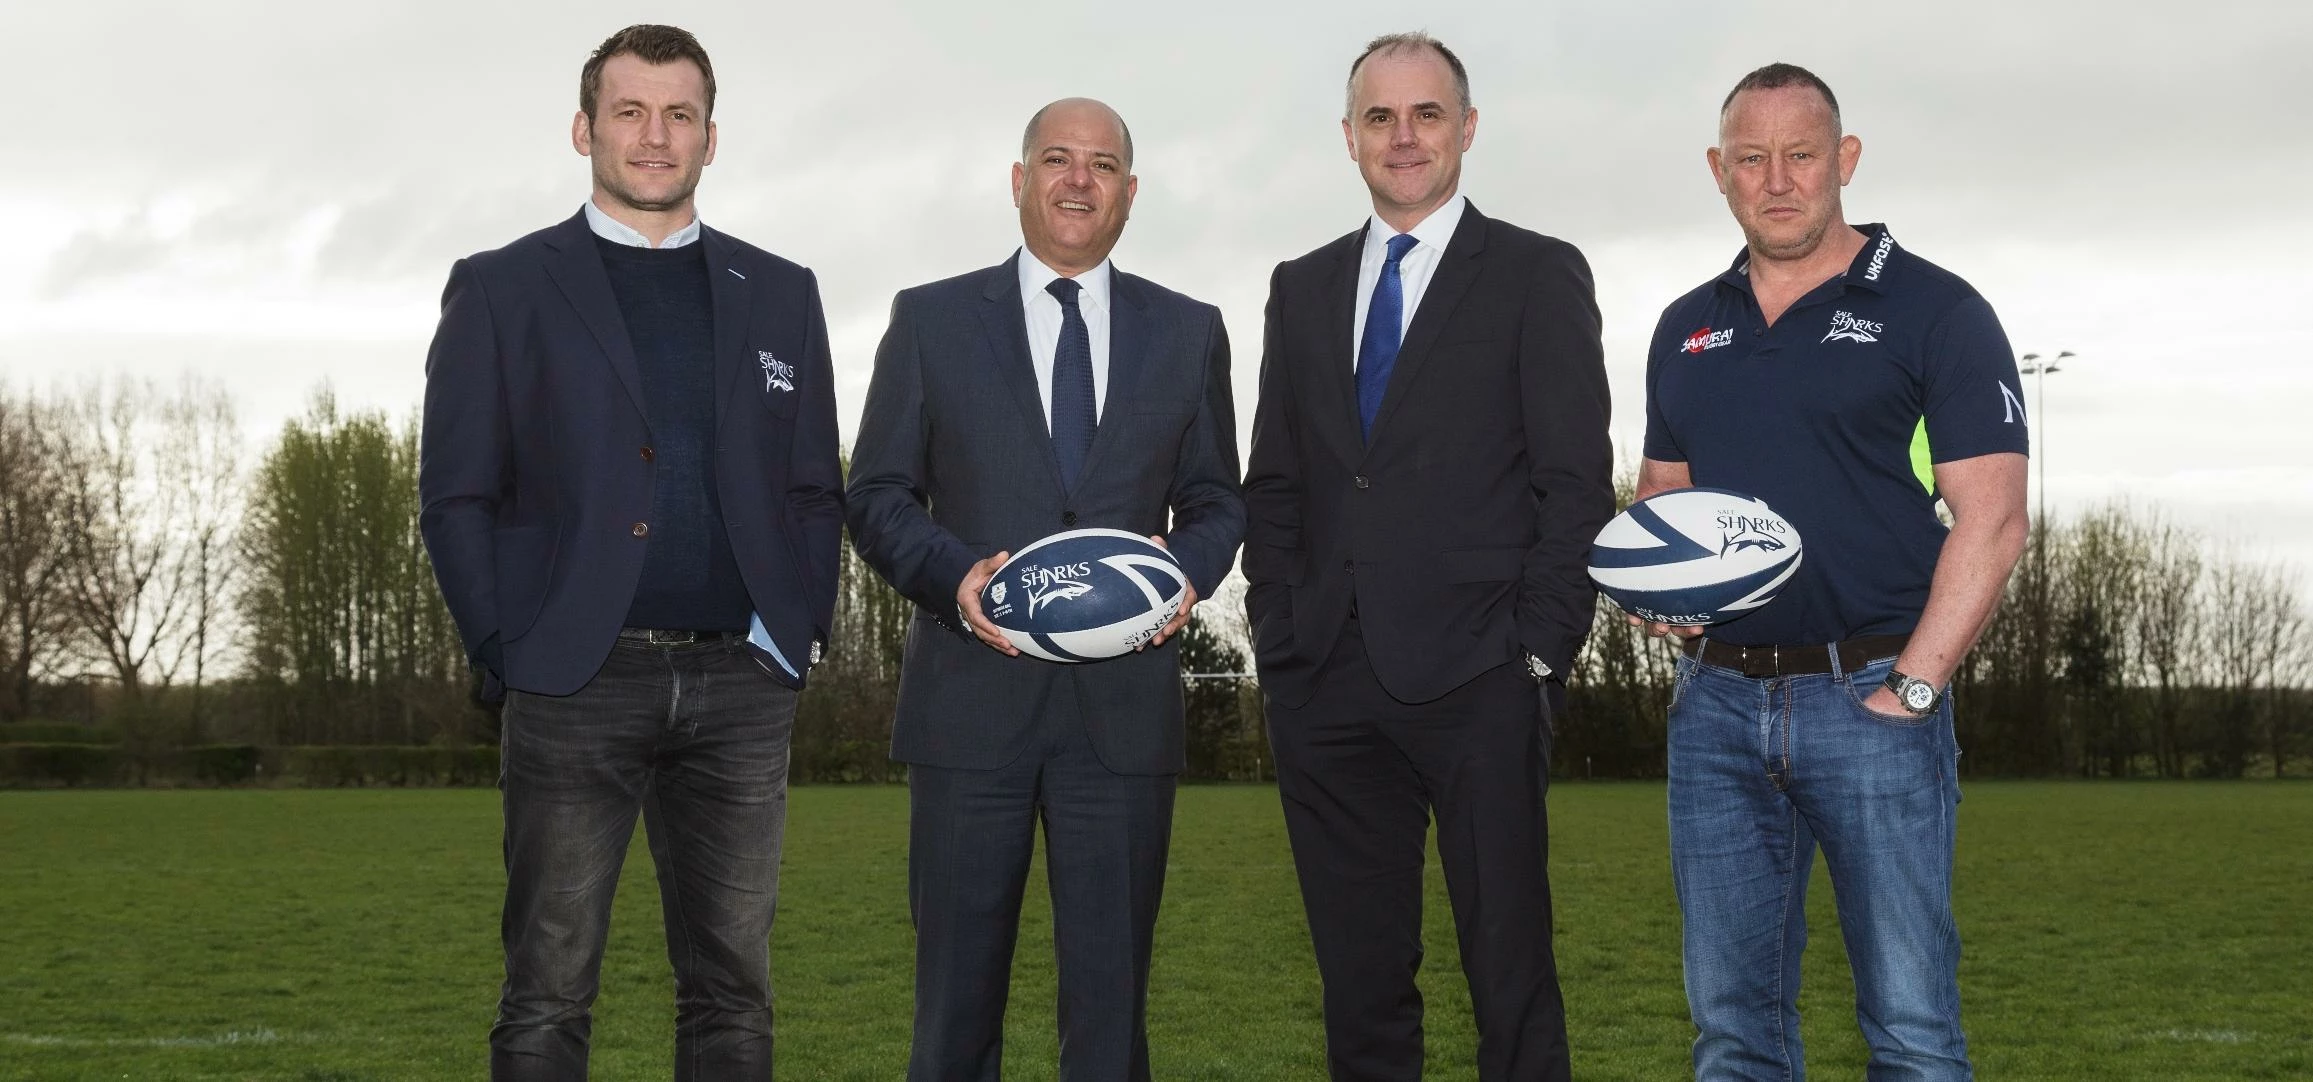 Sale Sharks commercial director Mark Cueto, Together’s commercial CEO Marc Goldberg,  Together’s per